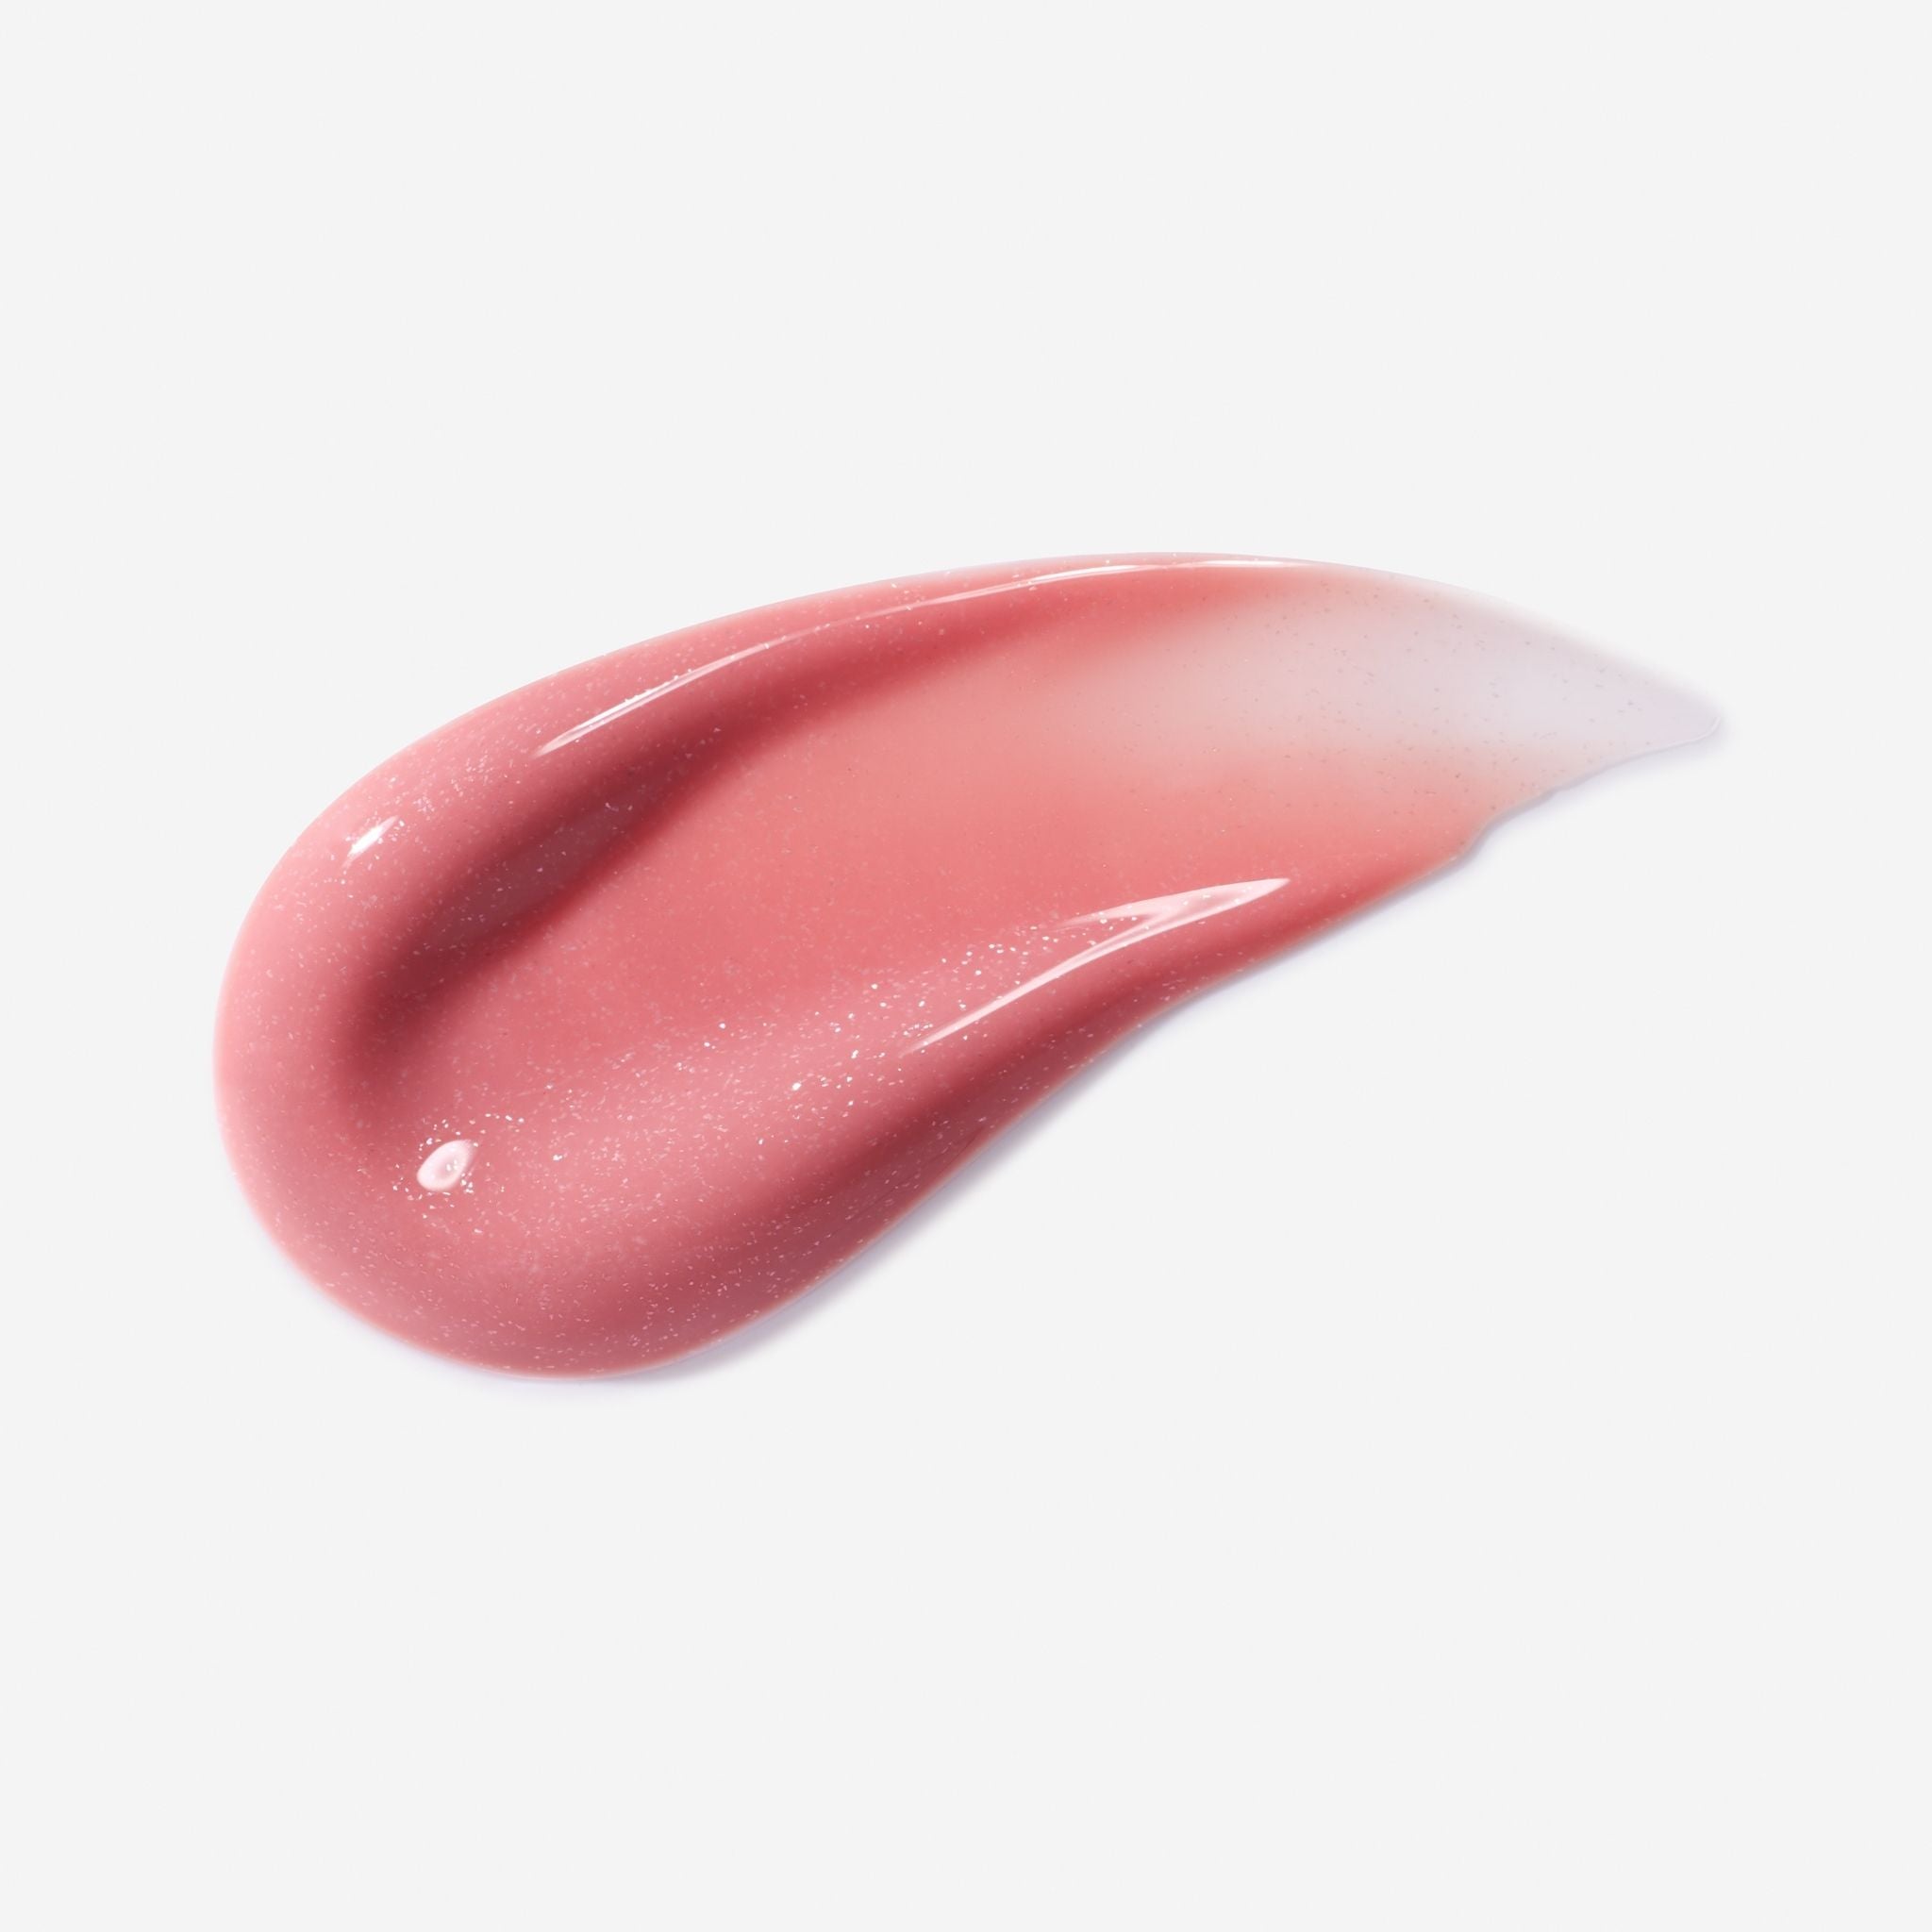 Perfect glob of glimmer lip gloss, previously known as glam peach. The ideal nude pink 